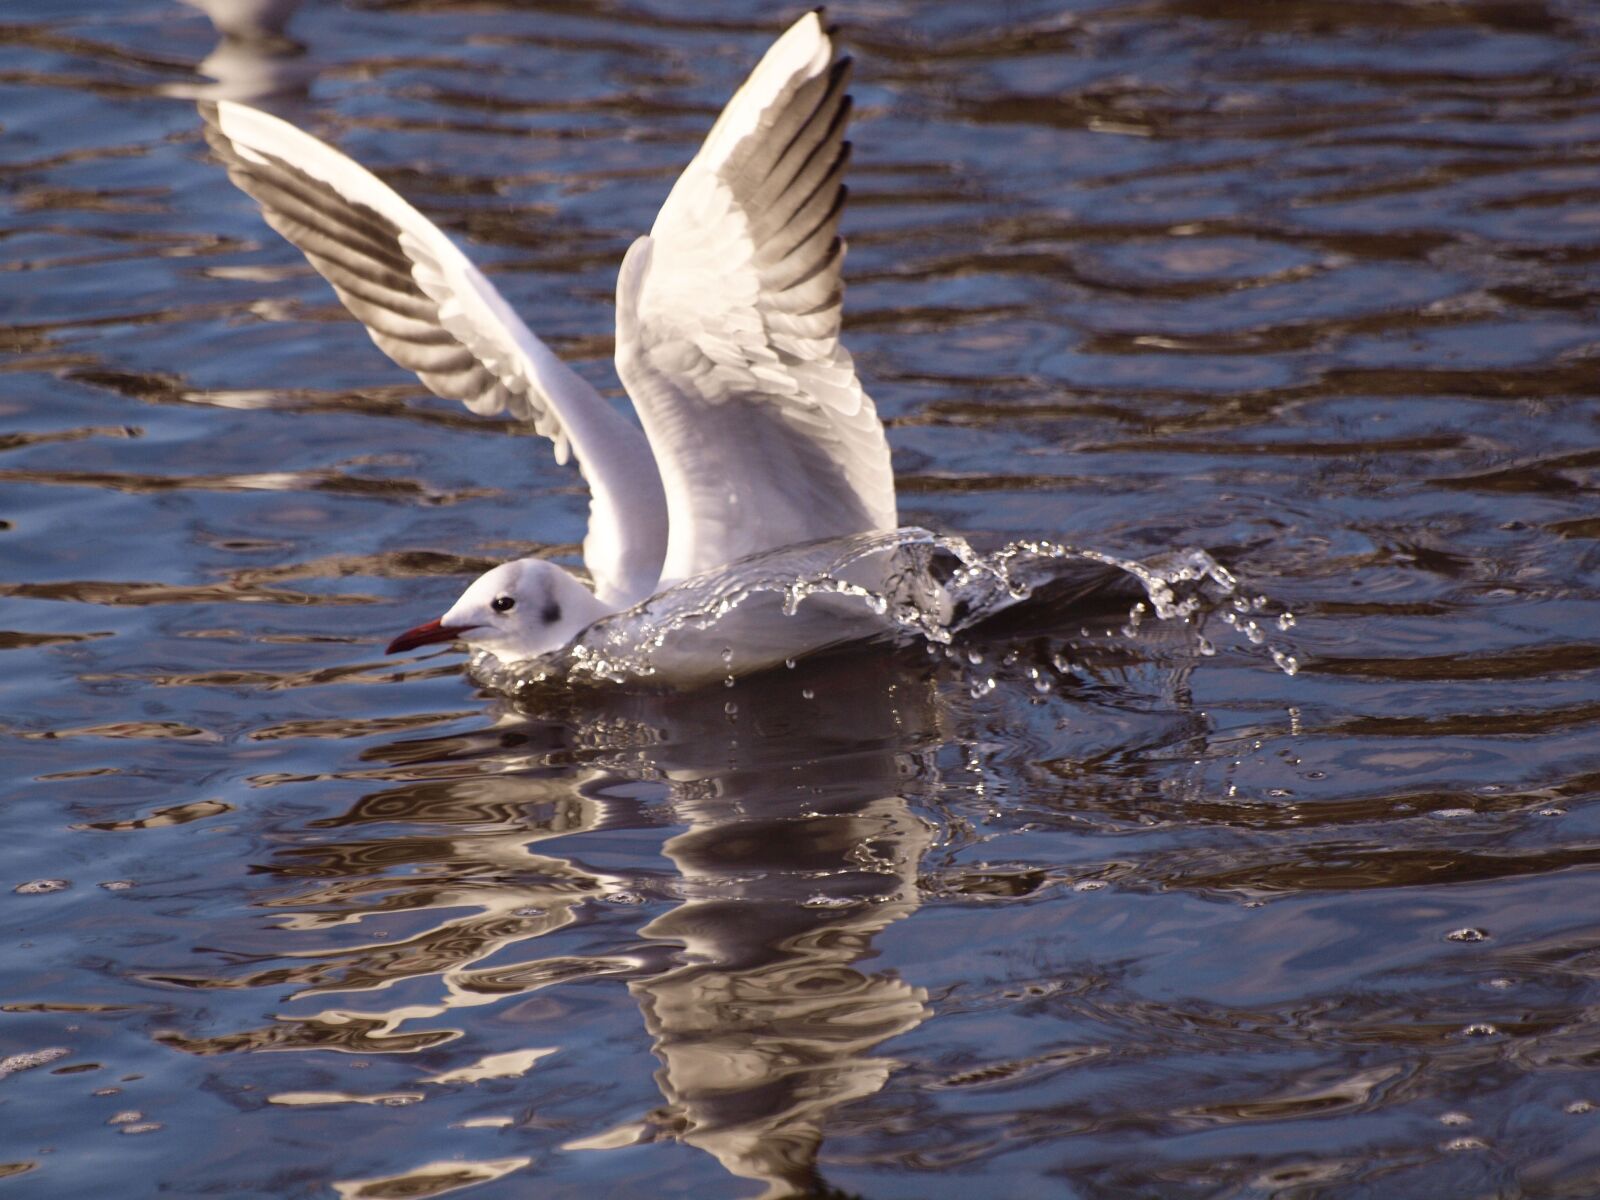 Olympus E-30 sample photo. Seagull, water, animals photography